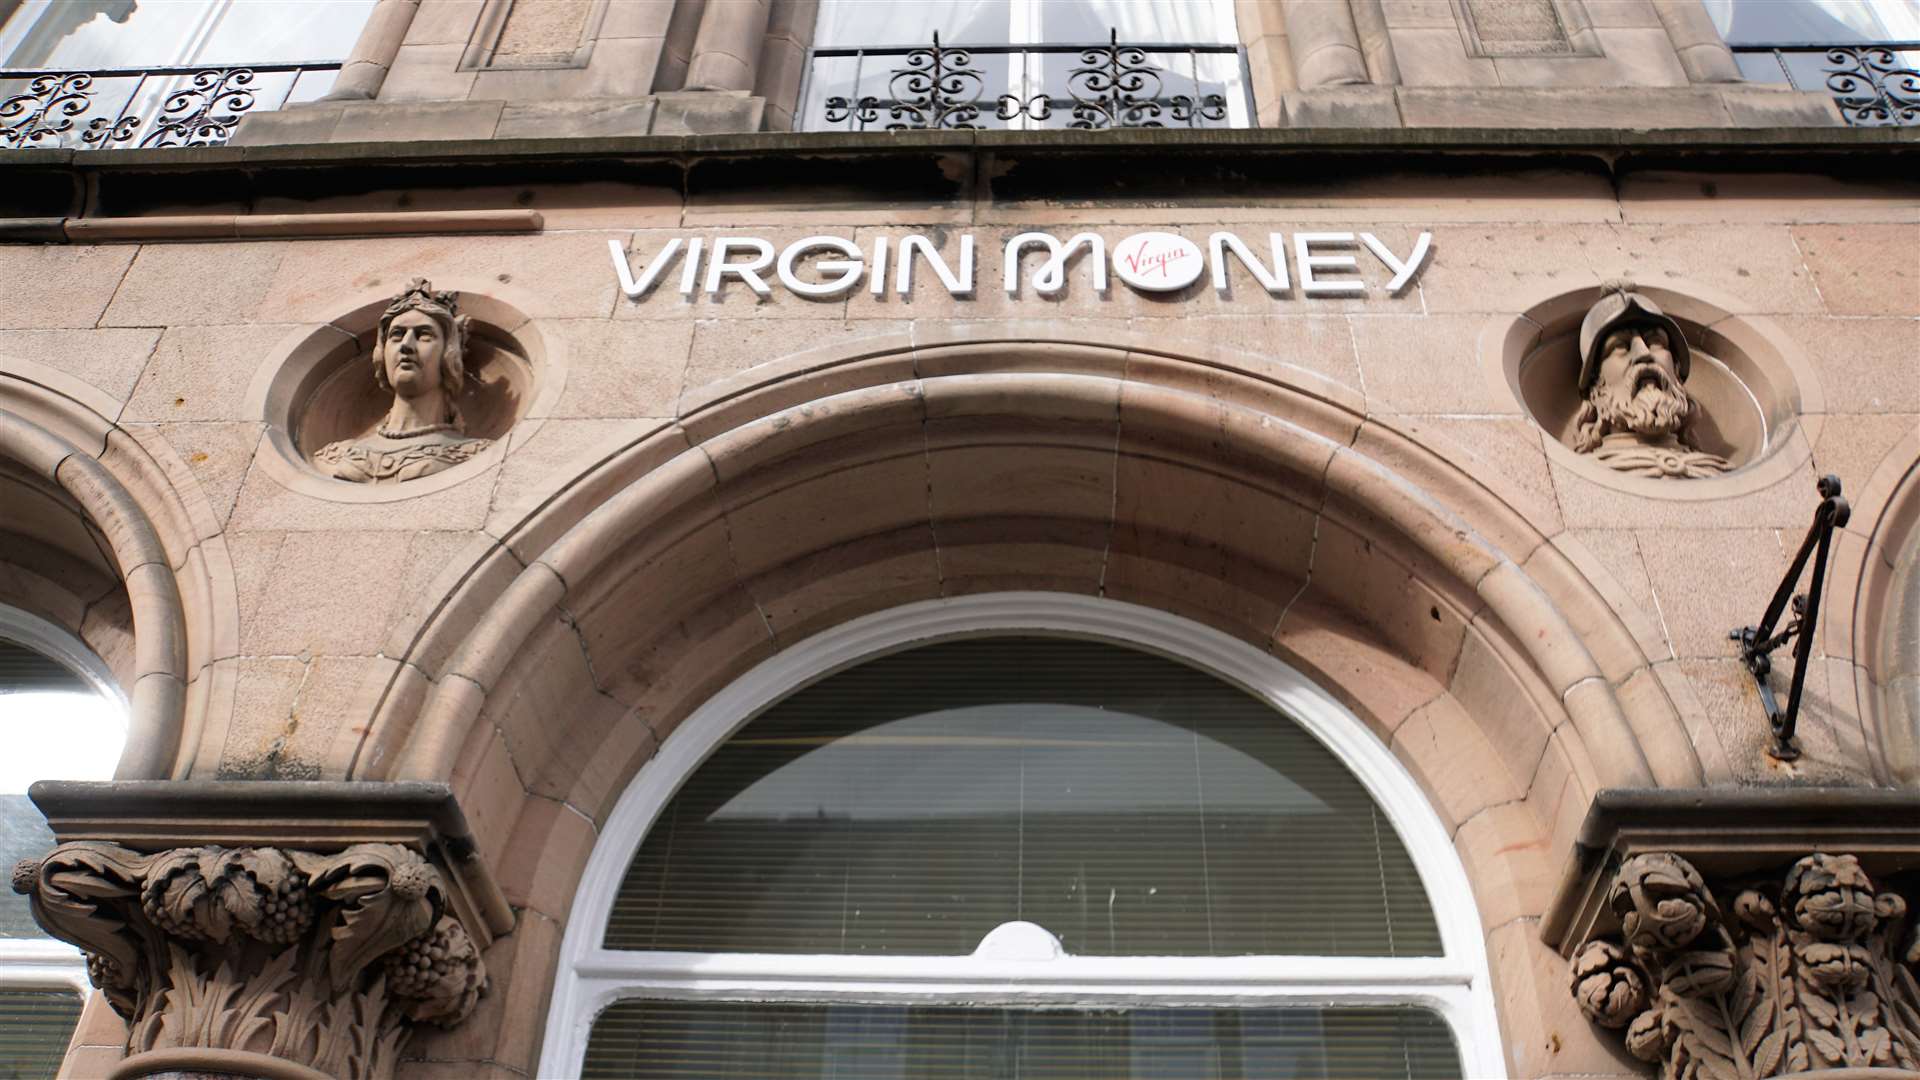 Busts of Queen Victoria and Robert the Bruce flank the new Virgin Money sign that was installed on the Bridge Street building this week.